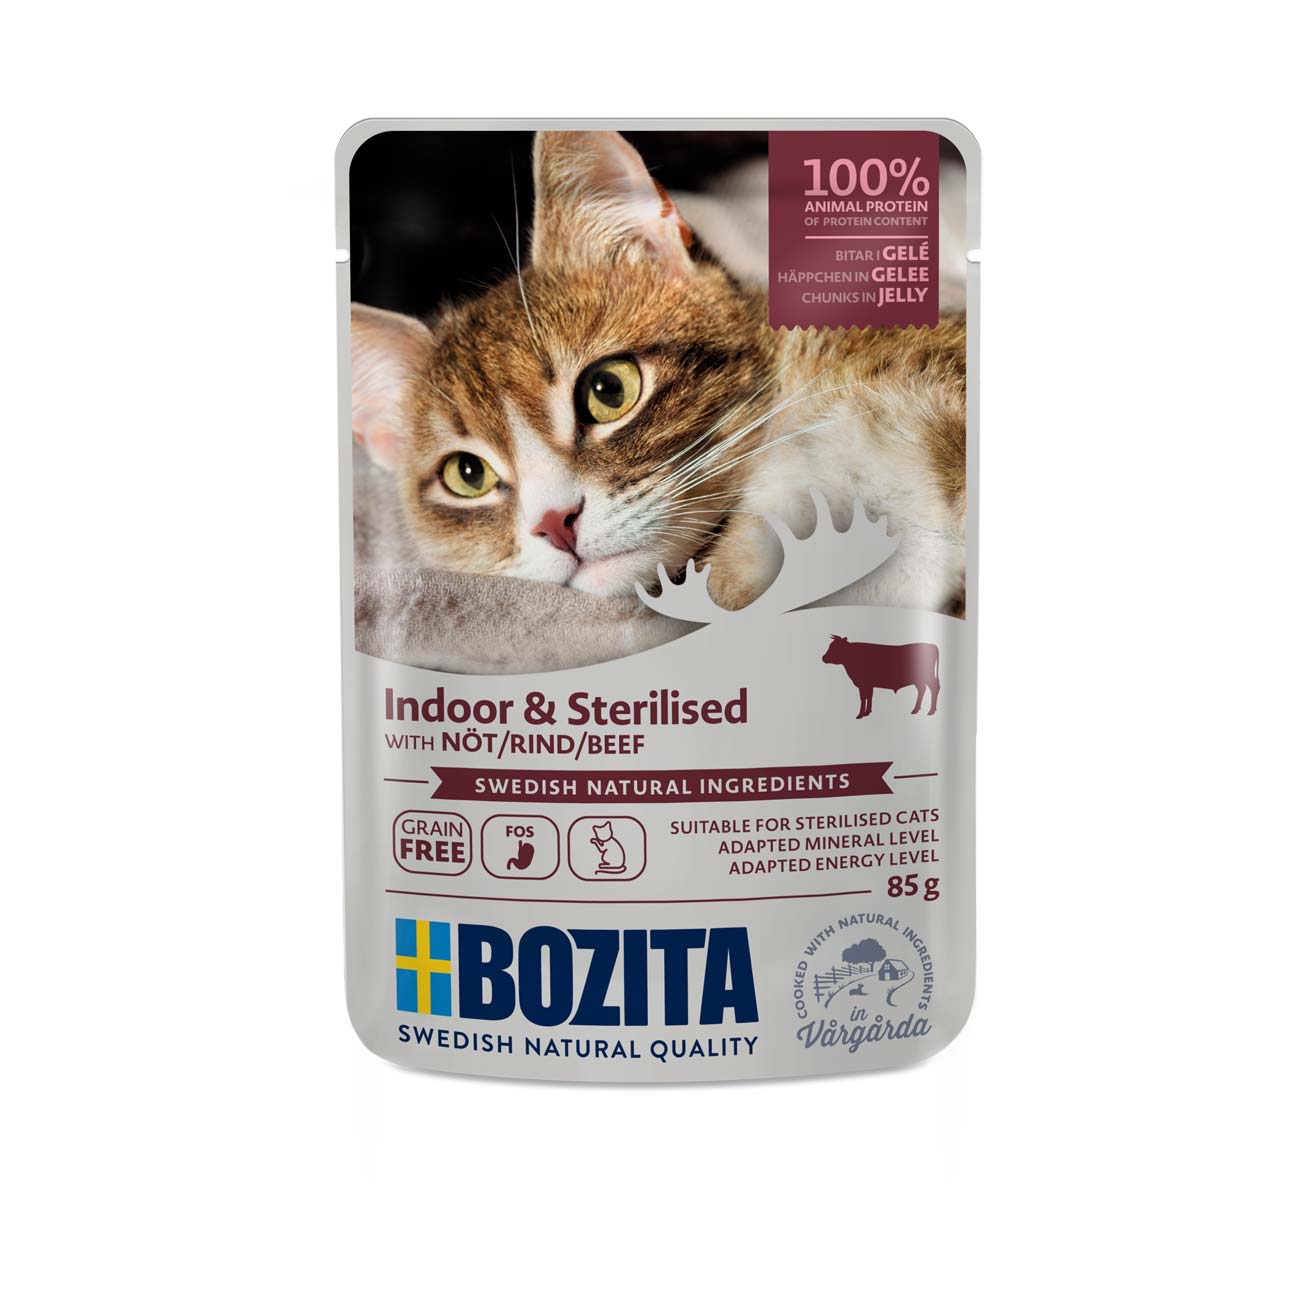 BOZITA INDOOR & STERILISED WITH BEEF – CHUNKS IN JELLY